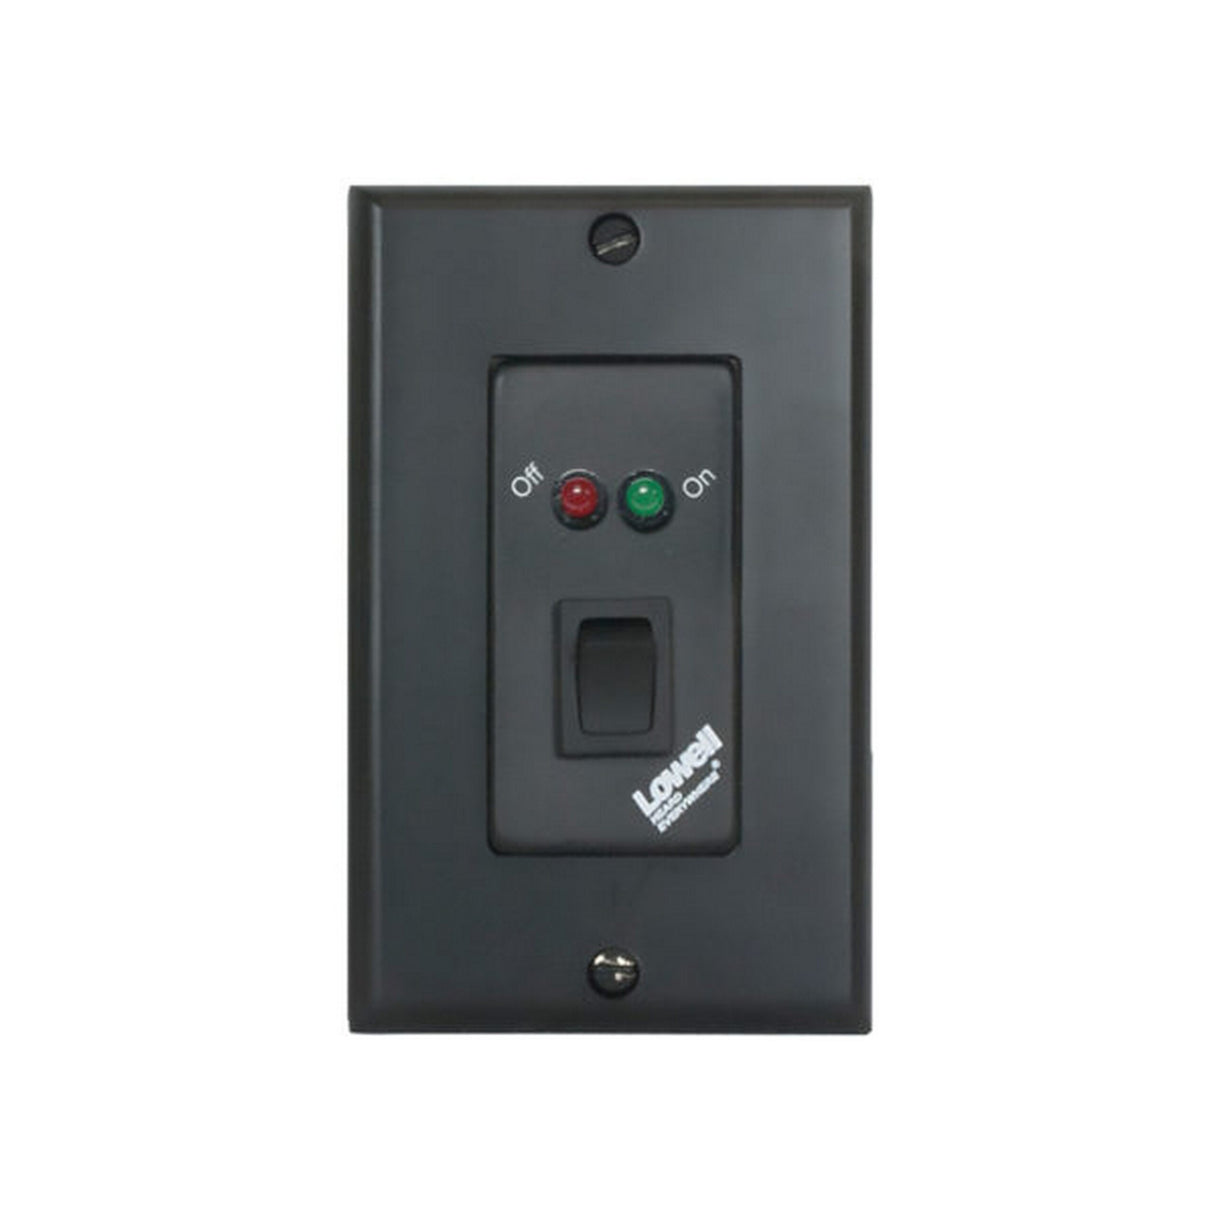 Lowell RPSB2-MP Momentary SPST Low-Voltage Switch